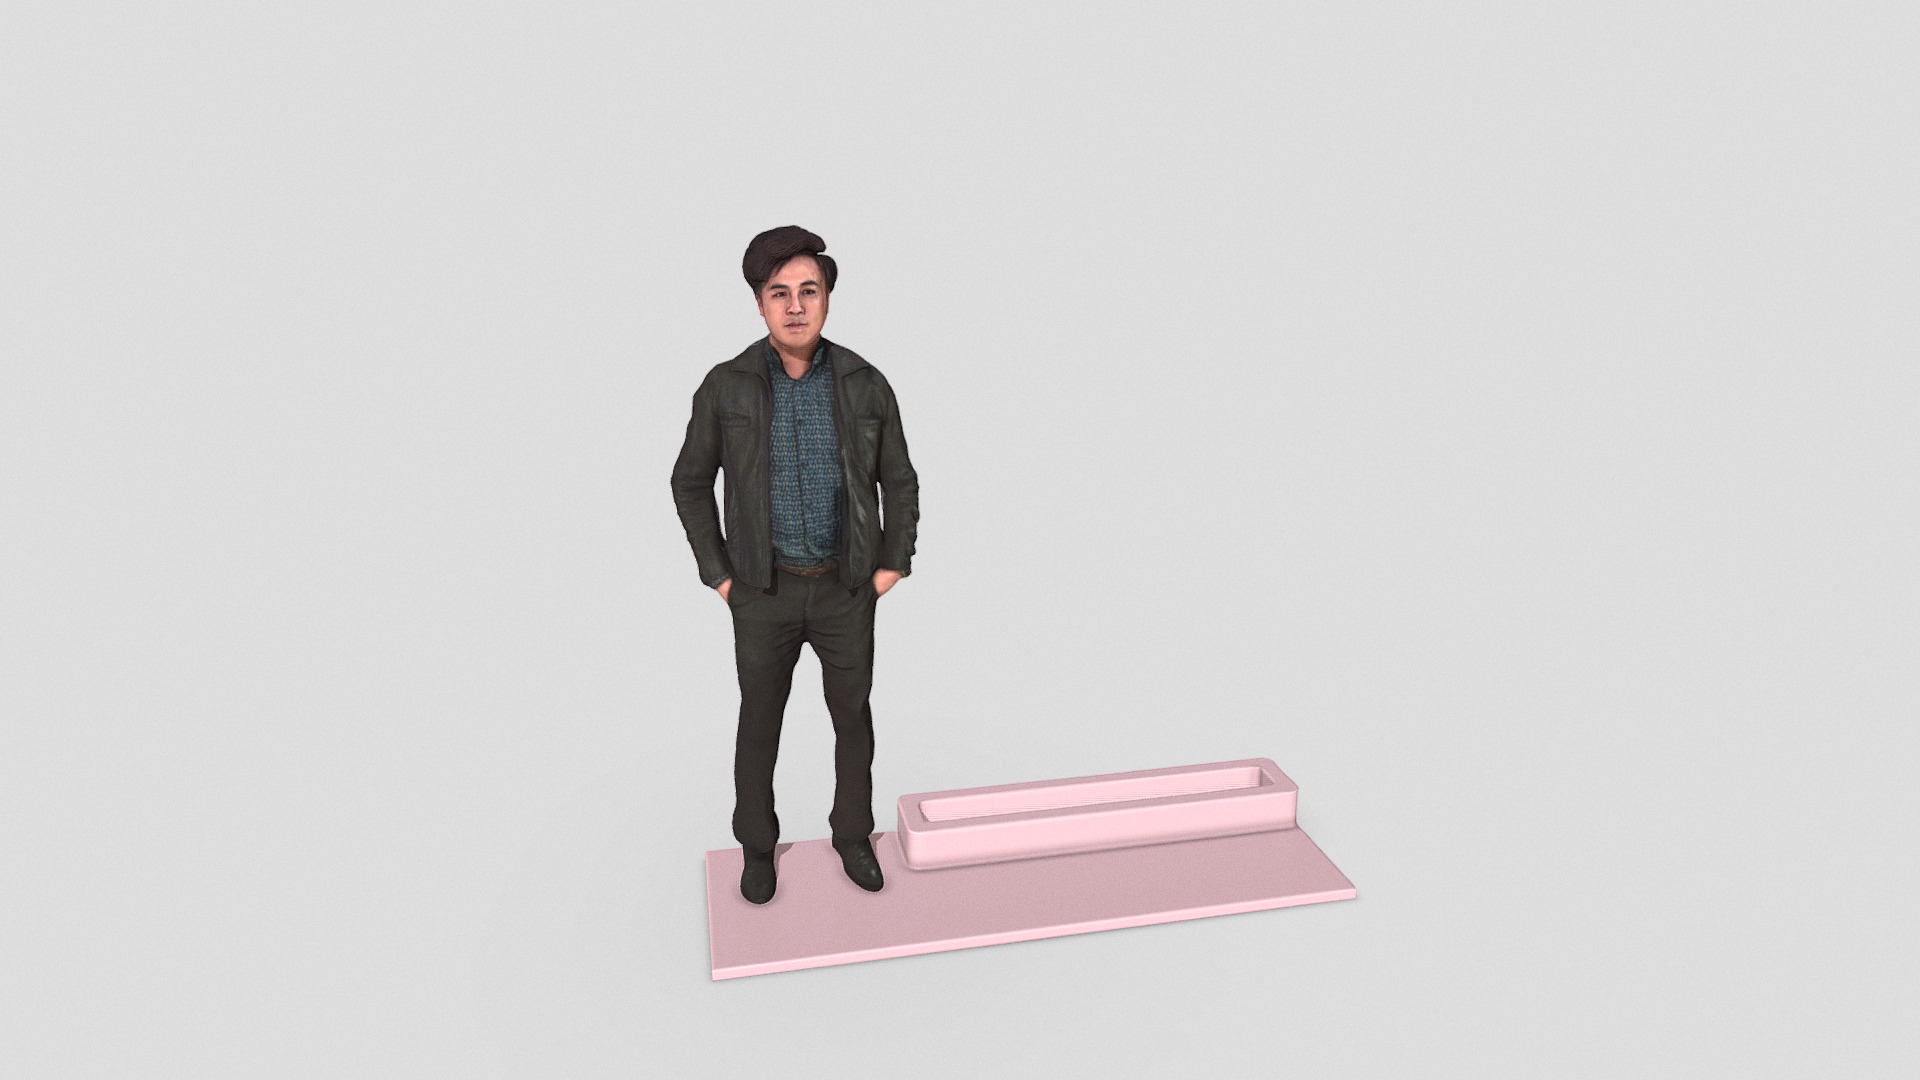 3D model 20191111_191111-card - This is a 3D model of the 20191111_191111-card. The 3D model is about a man standing on a pink object.